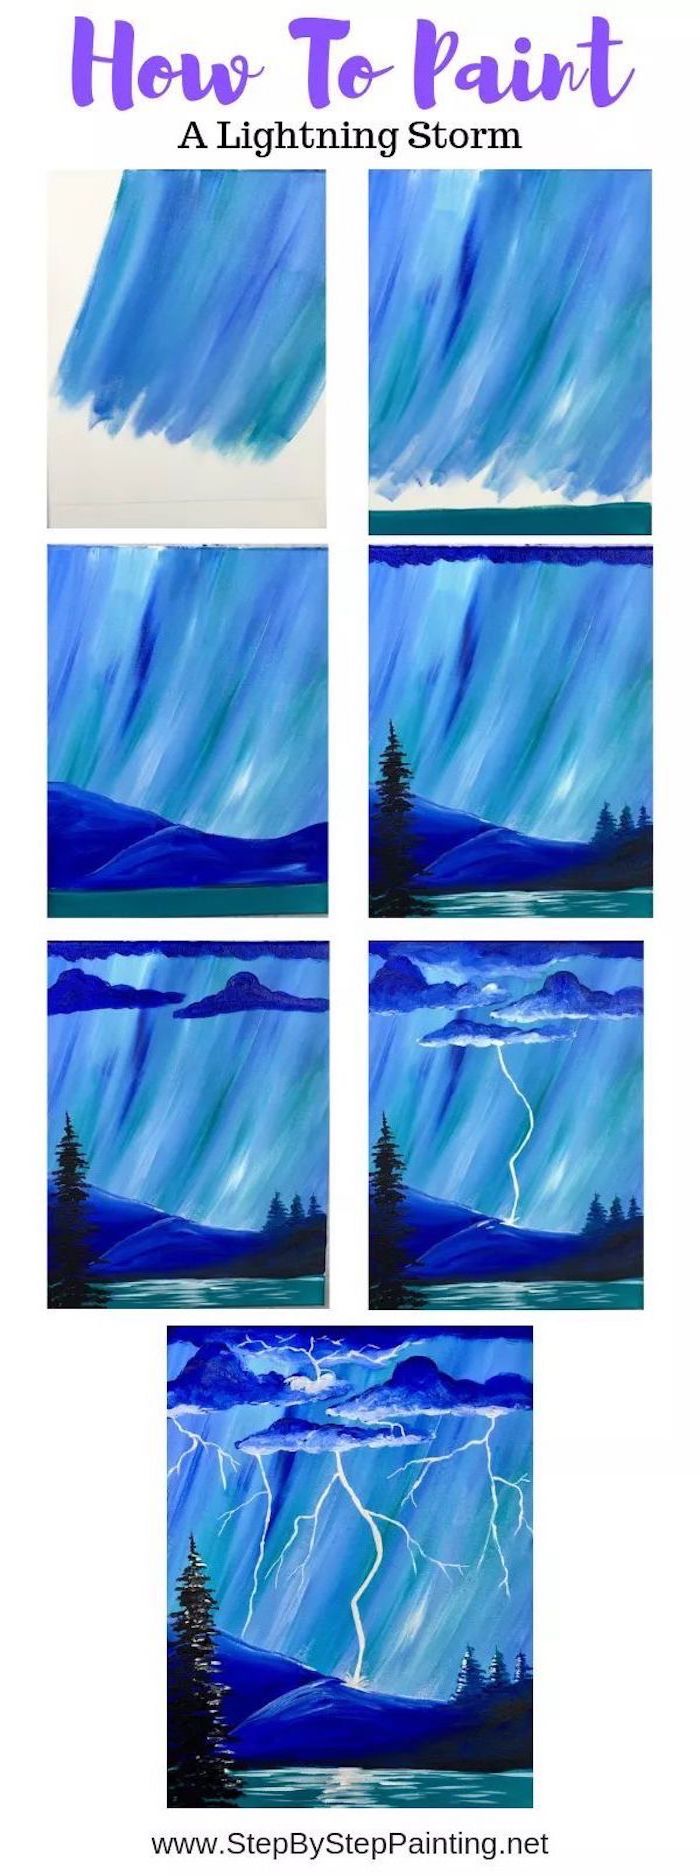 acrylic painting techniques, how to paint a lightning storm, photo collage of step by step diy tutorial